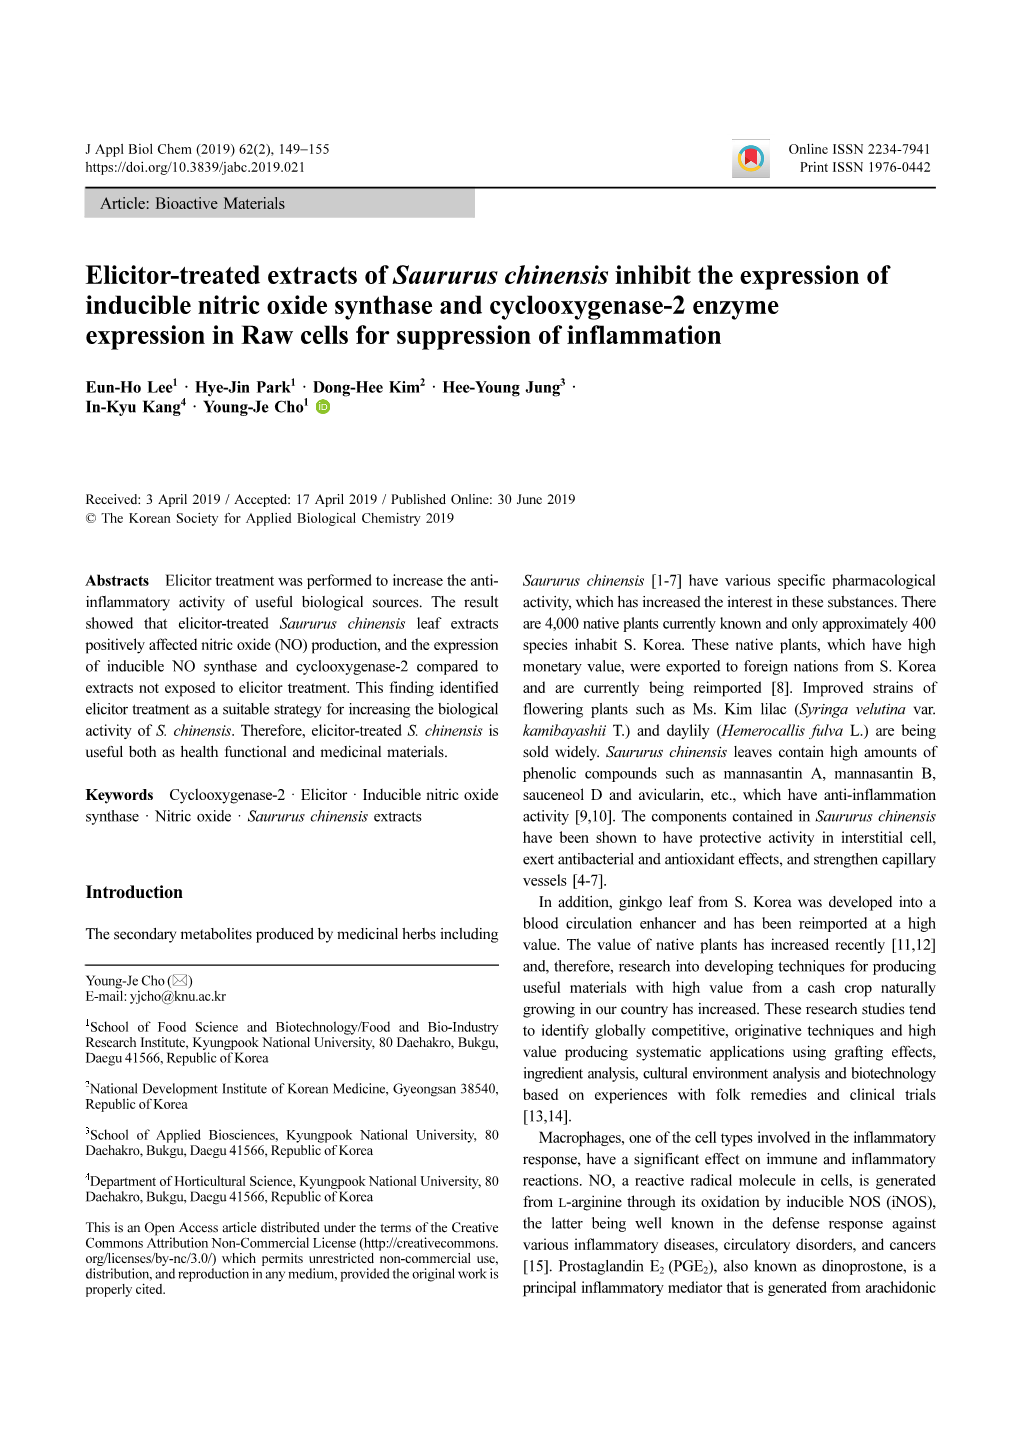 Elicitor-Treated Extracts of Saururus Chinensis Inhibit